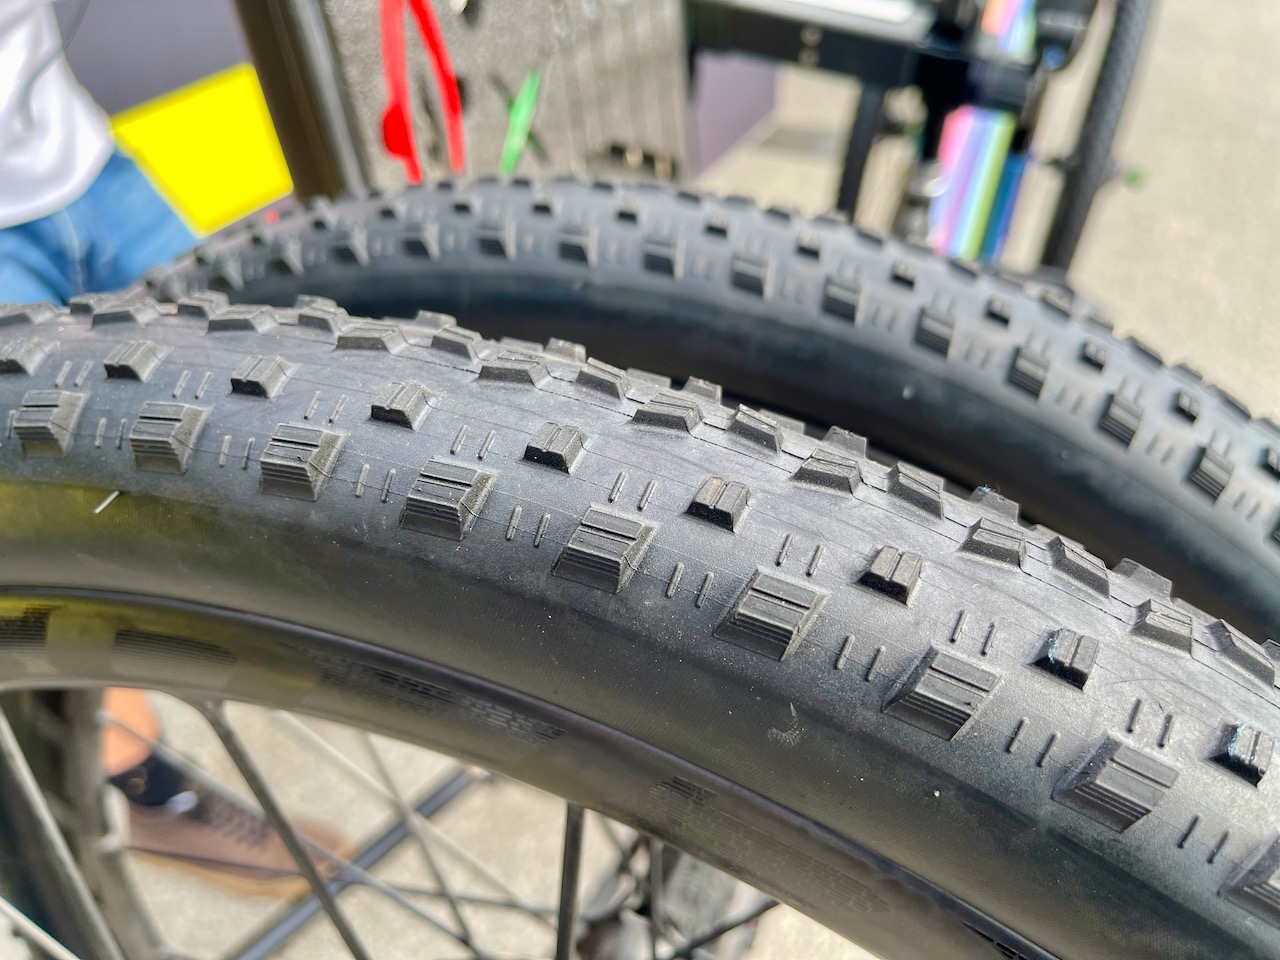 Maxxis mud race tires upclose